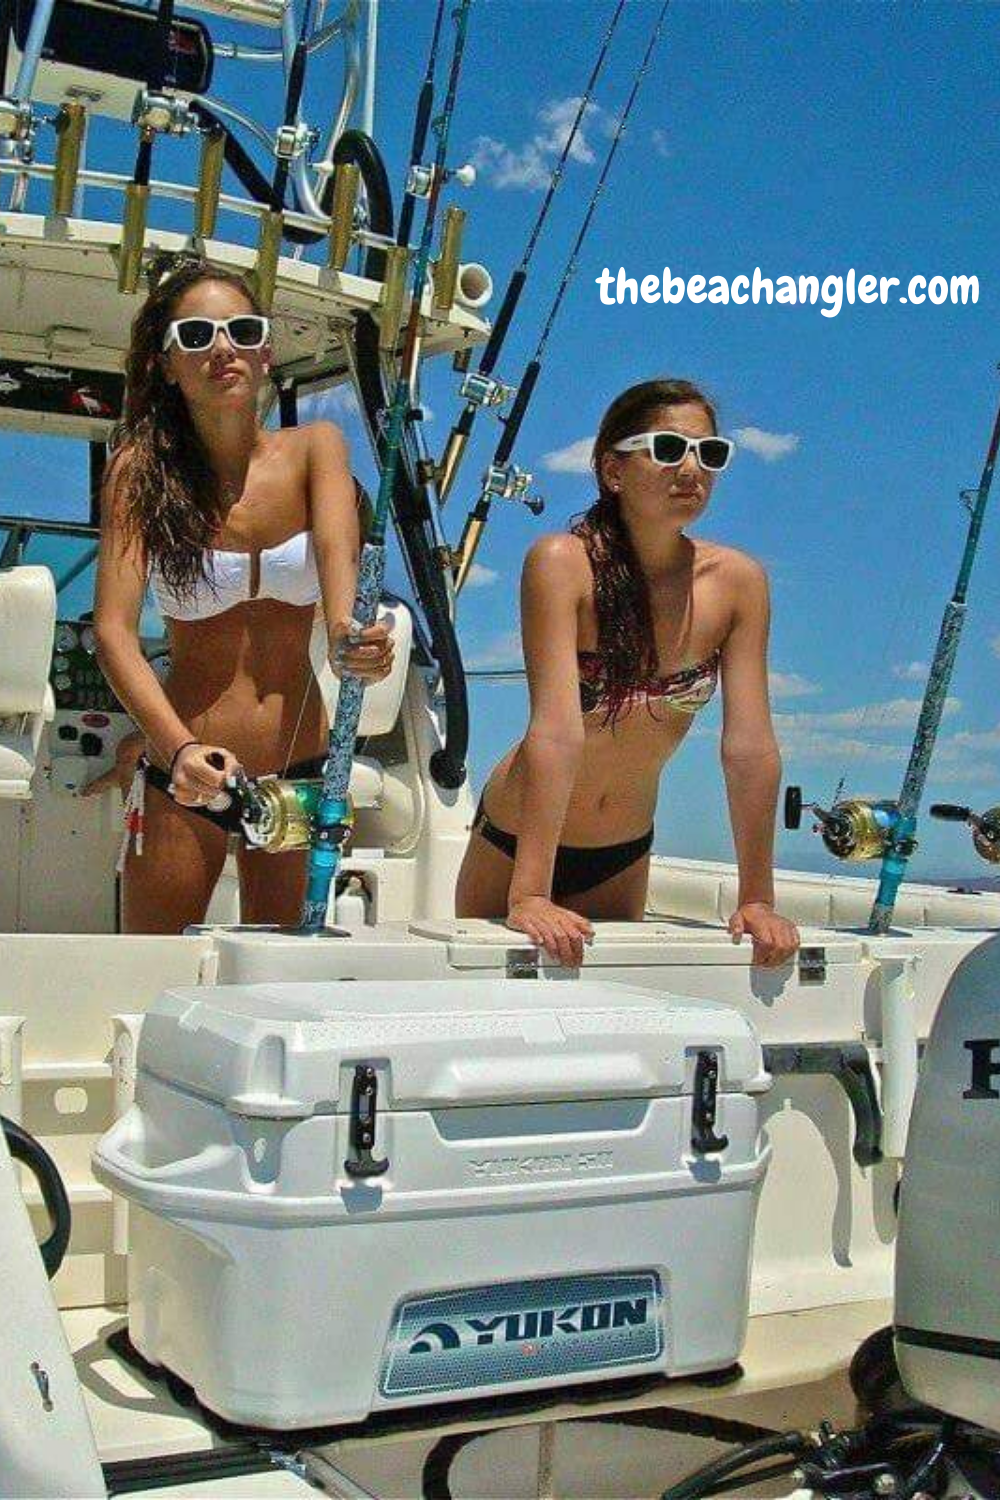 Ladies hooked up fishing offshore. TowBoatUS review